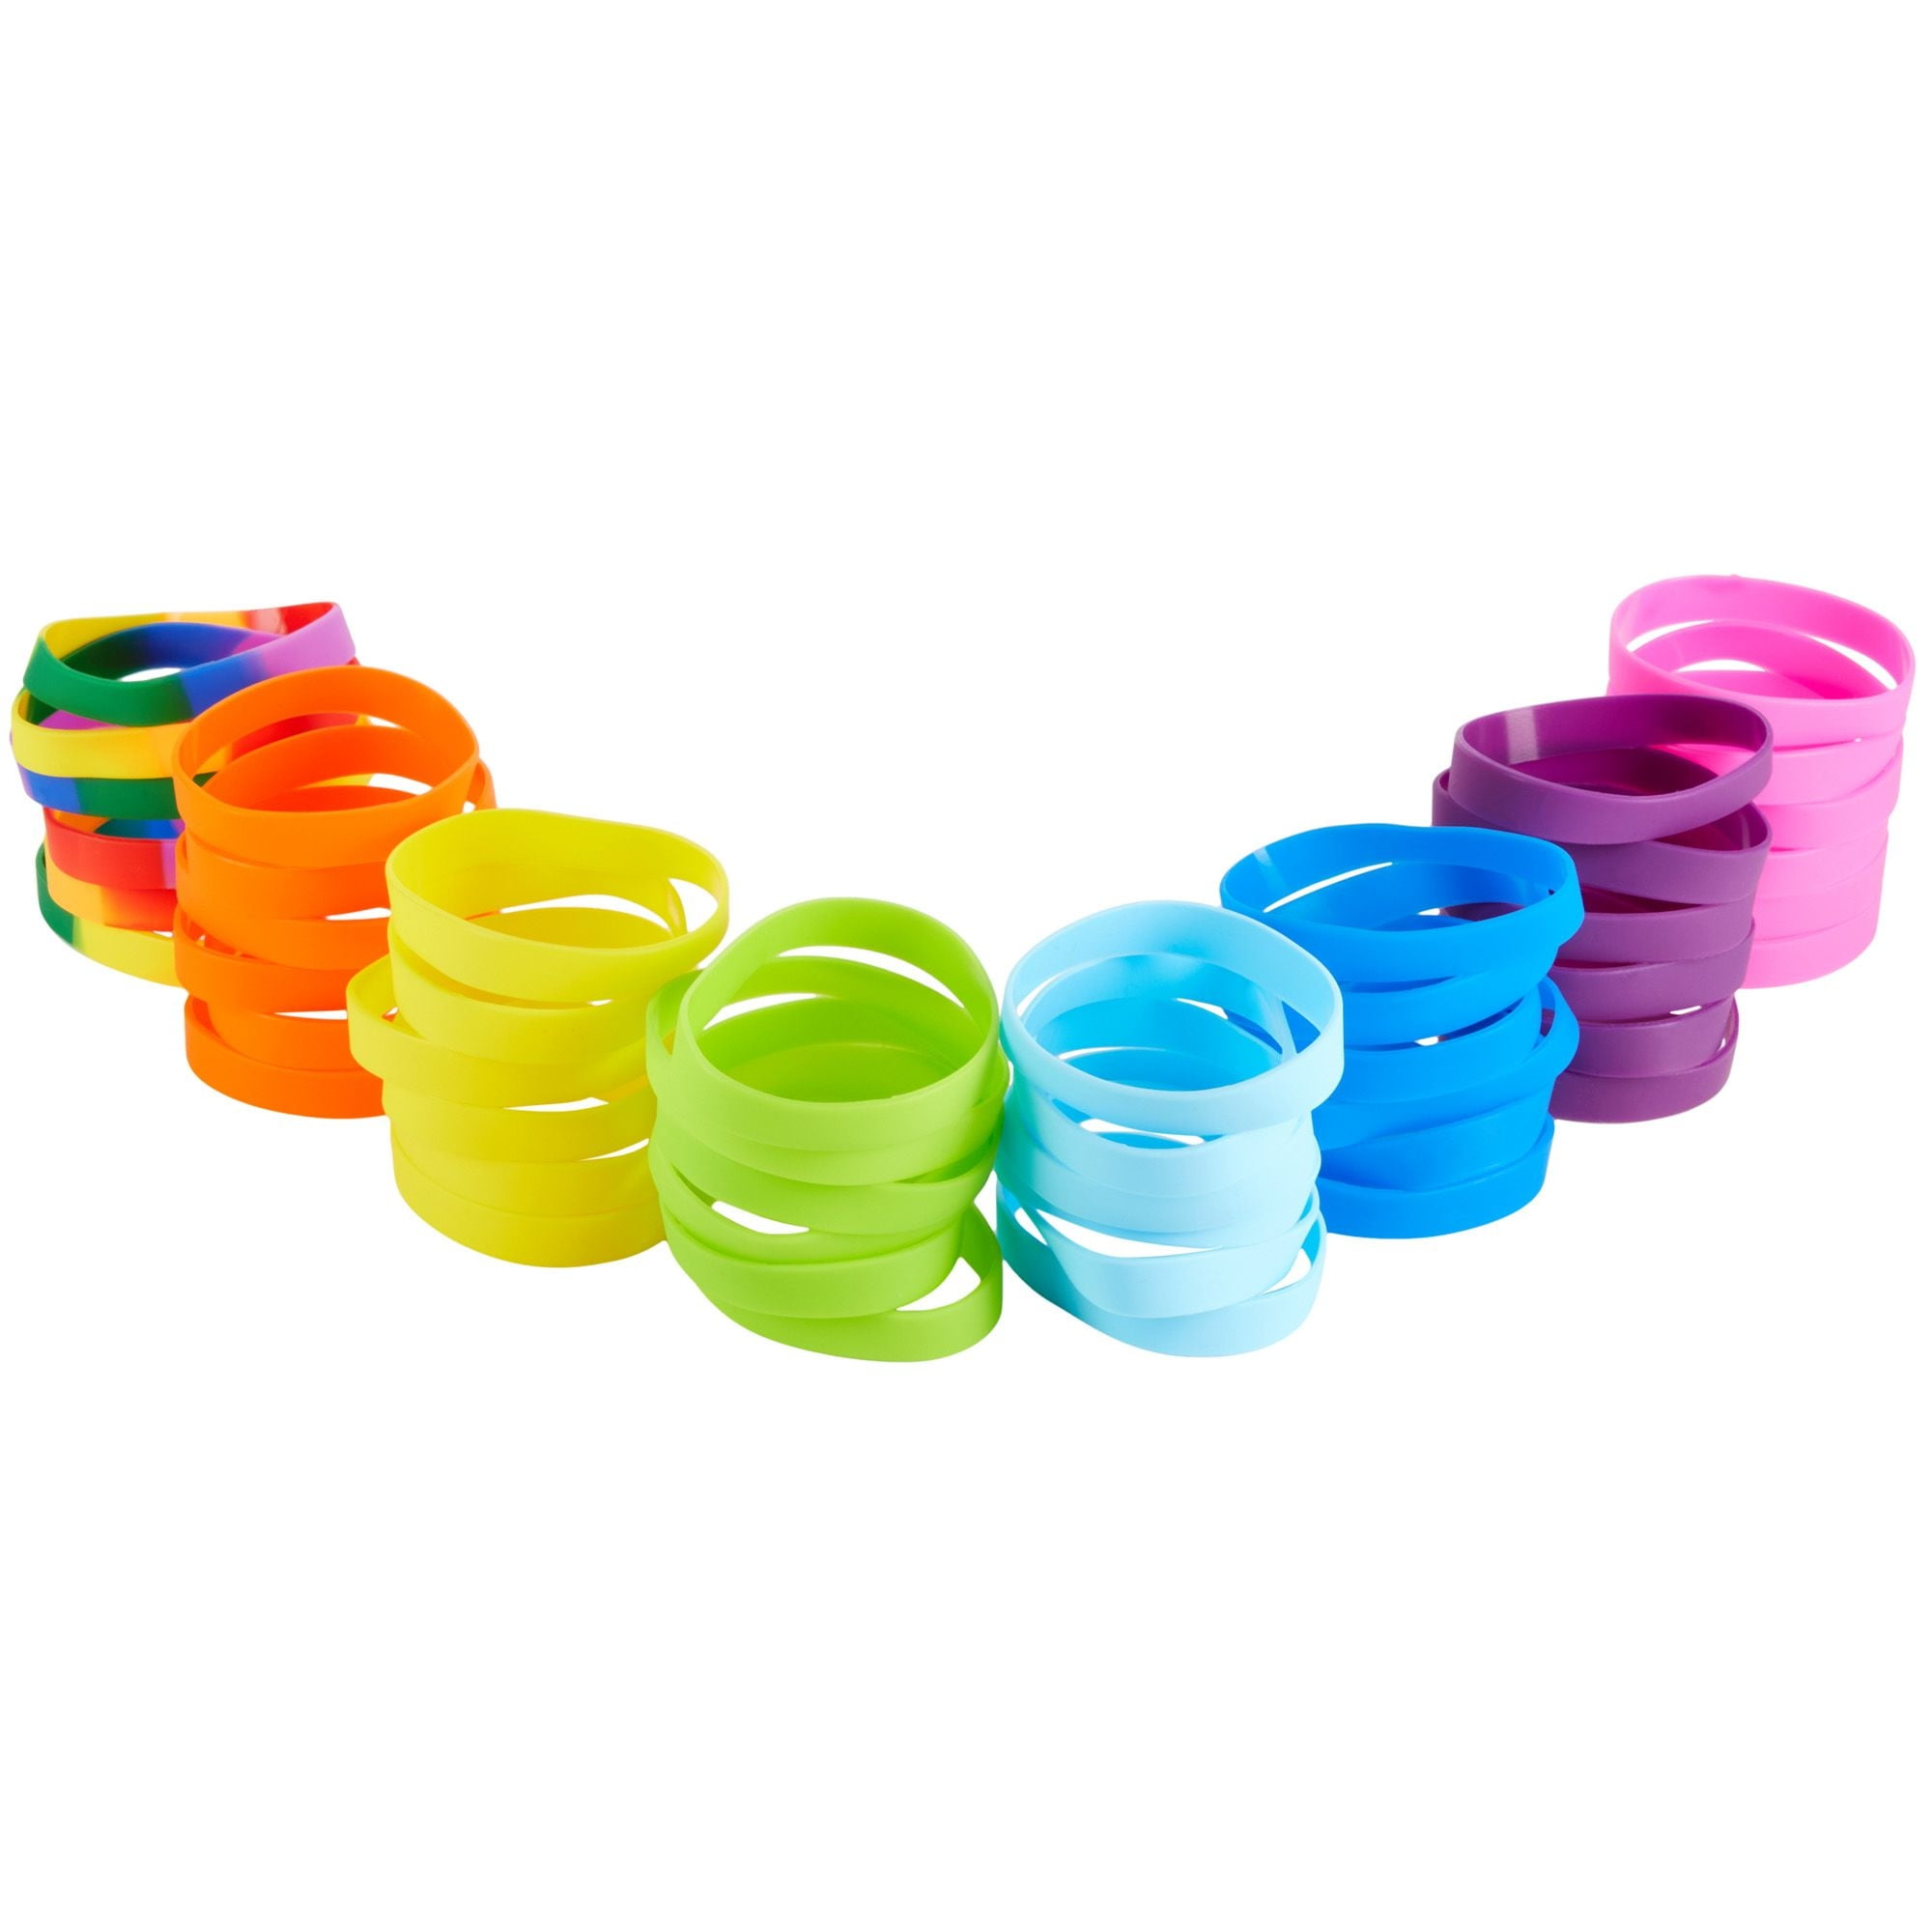 Personalized Silicone Wristbands Custom Rubber Bracelets Bulk Customized  Wristbands for Events Sports Motivation Gifts Supports Men Teens :  Amazon.ca: Office Products